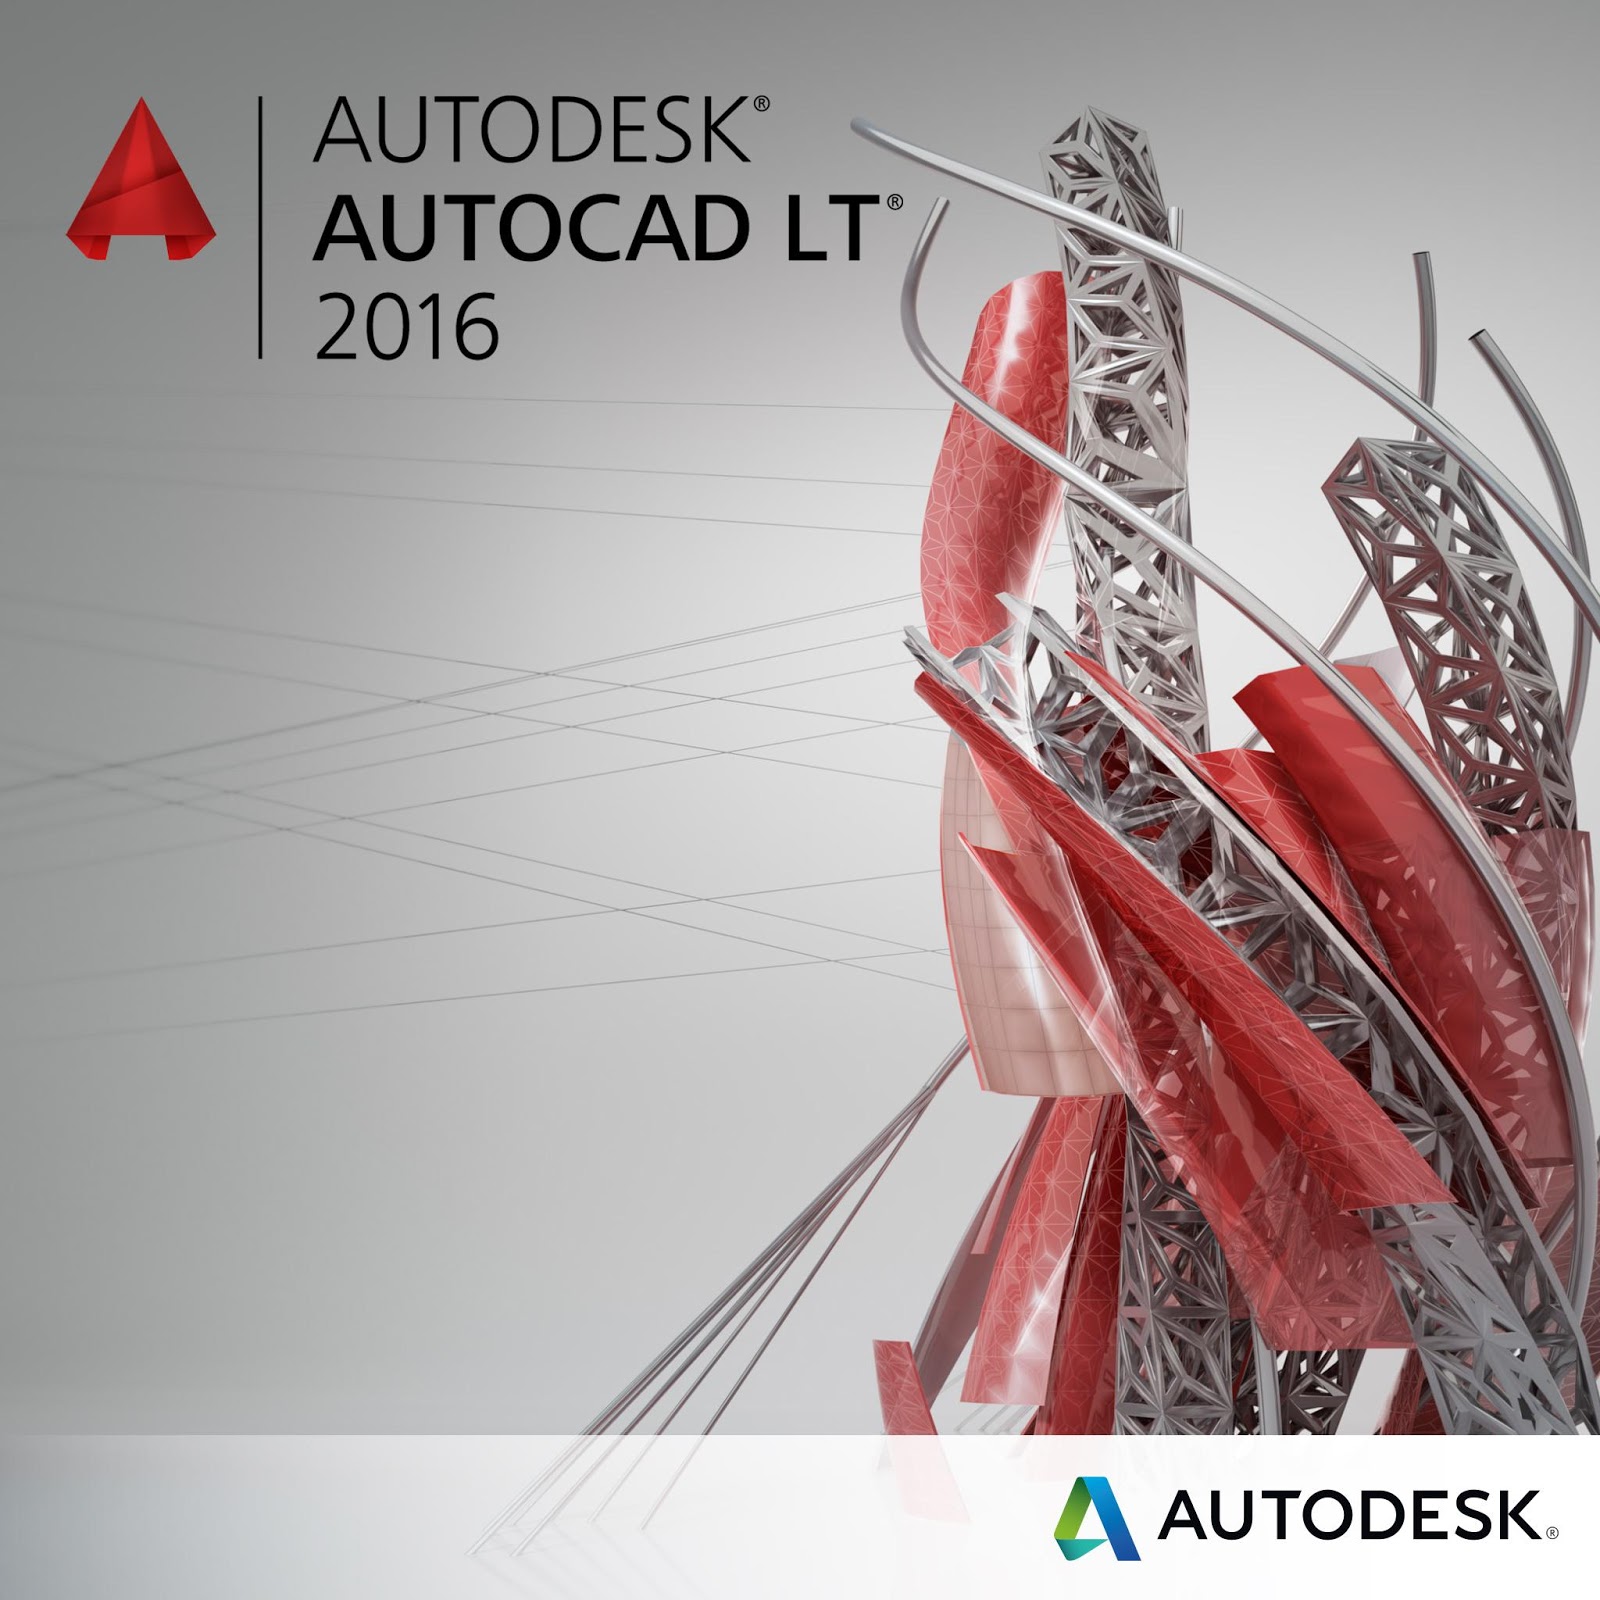 autocad 2016 free download with crack 32 bit filehippo